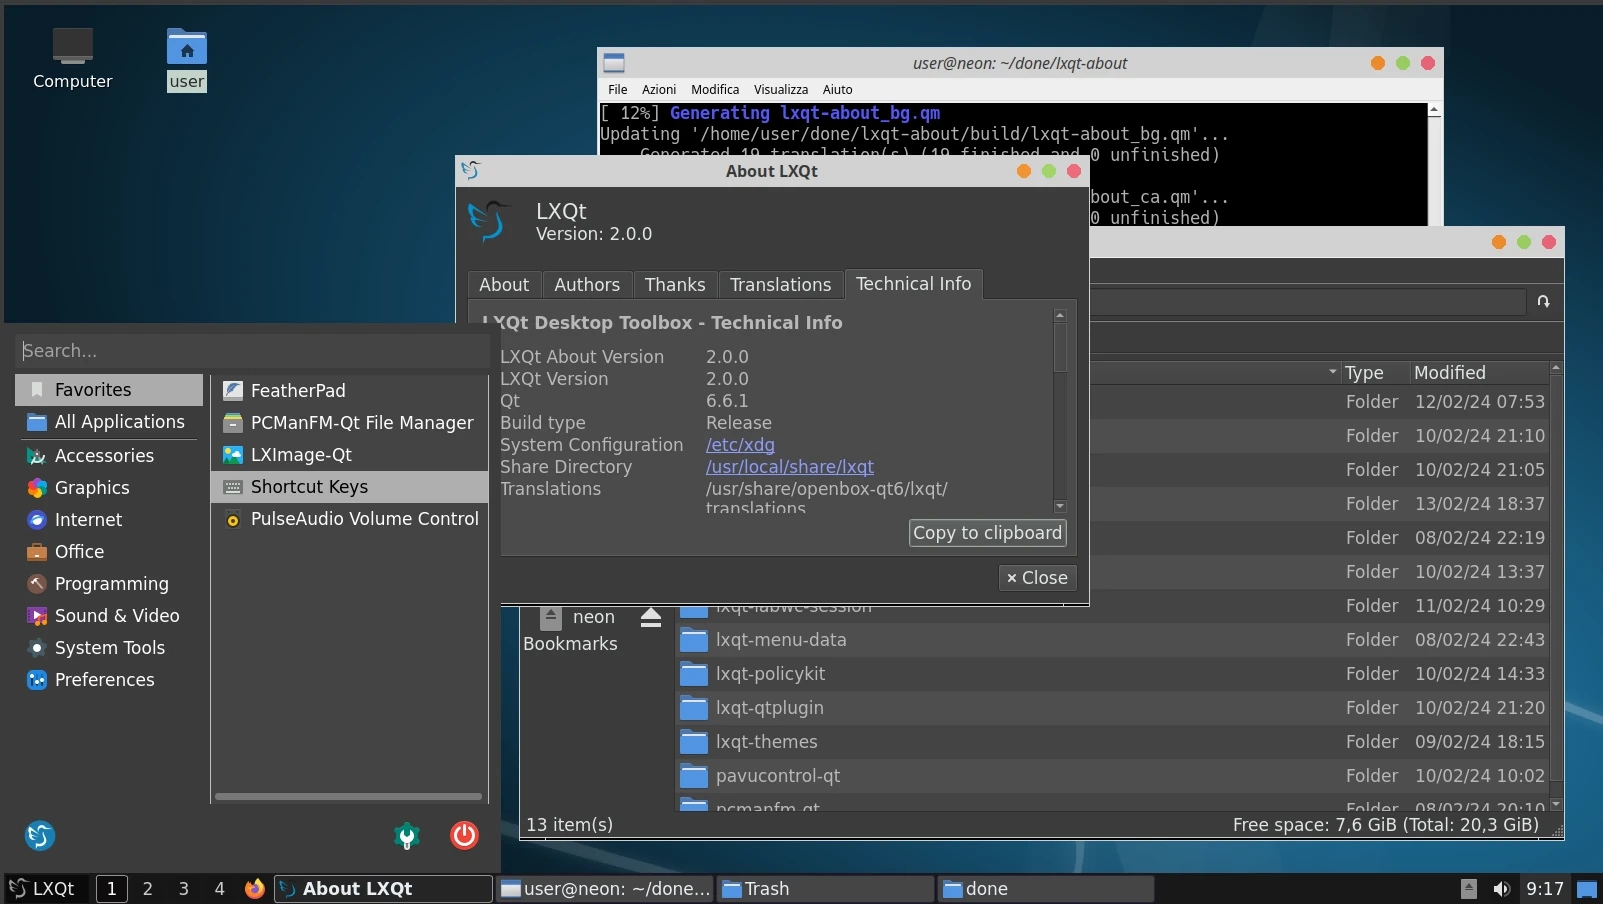 Announcement: LXQt 2.0 Desktop To Be Launched in April with Upgraded Applications Menu and Qt 6 Port